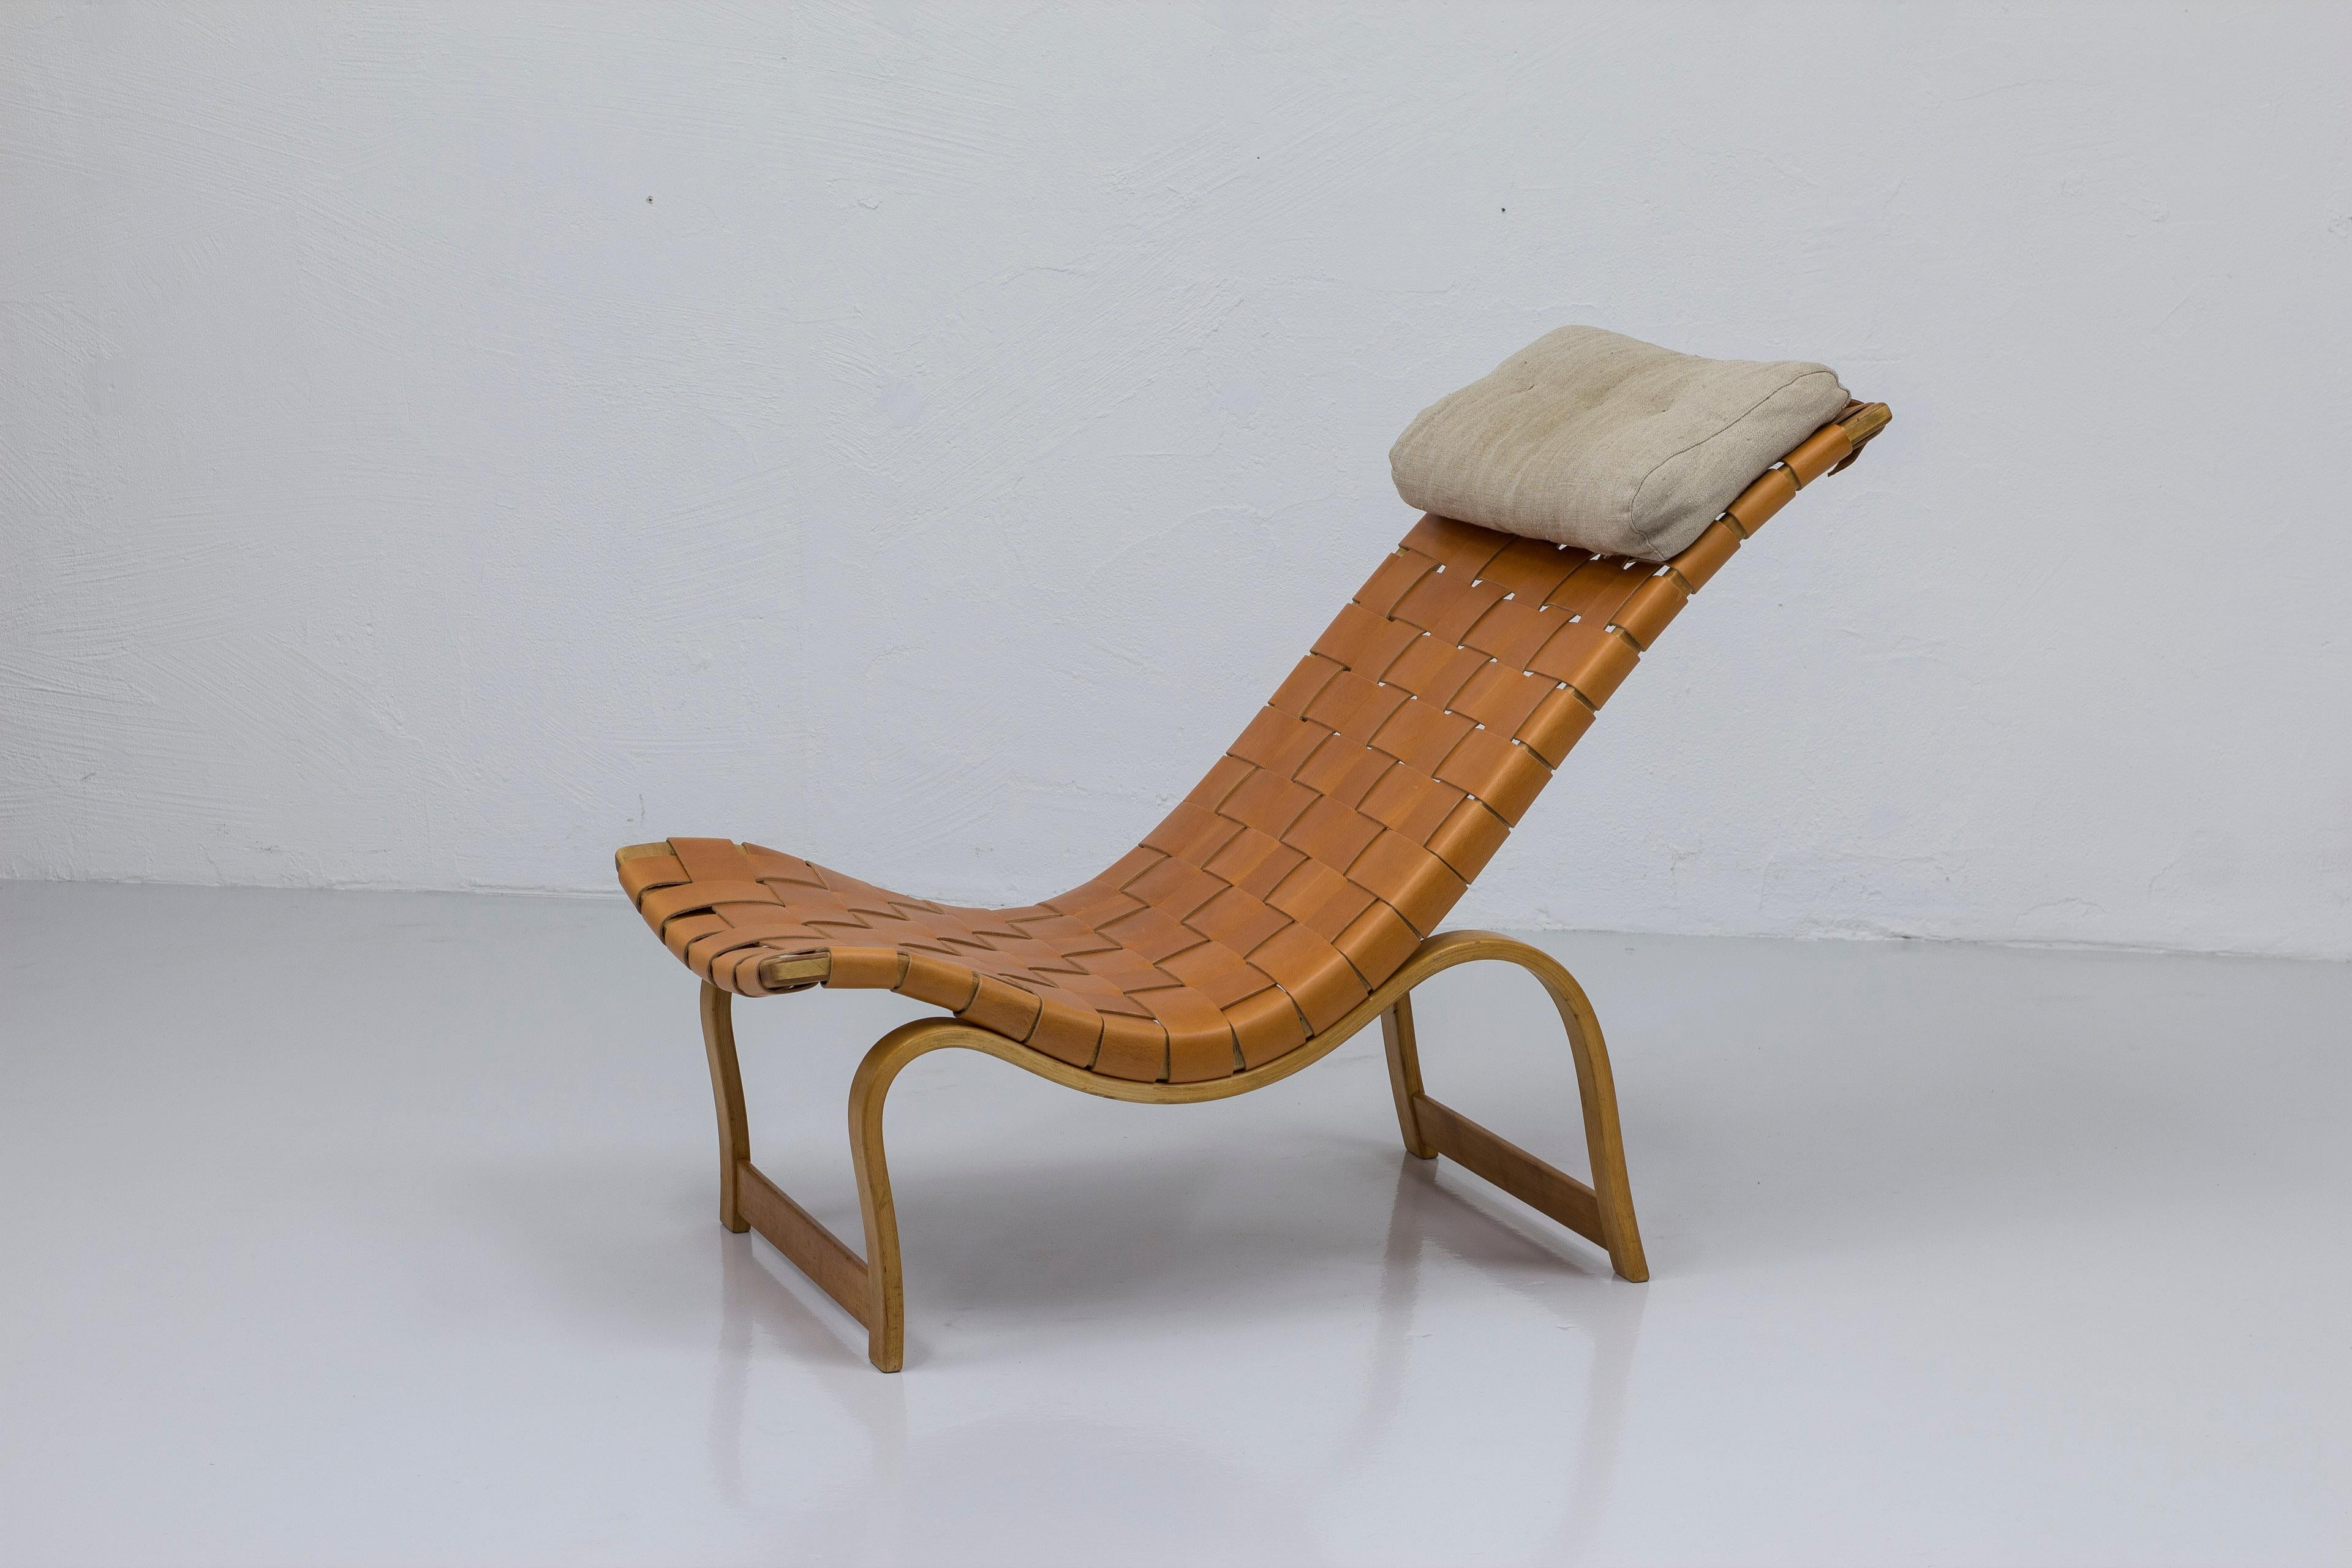 Resting chair model 36 designed by Bruno Mathsson in 1936. This example made by Firma Karl Mathsson in 1941. Made from steam bent birch and solid beech wood. New leather webbing in thick cognac hide. Very good vintage condition with age related wear